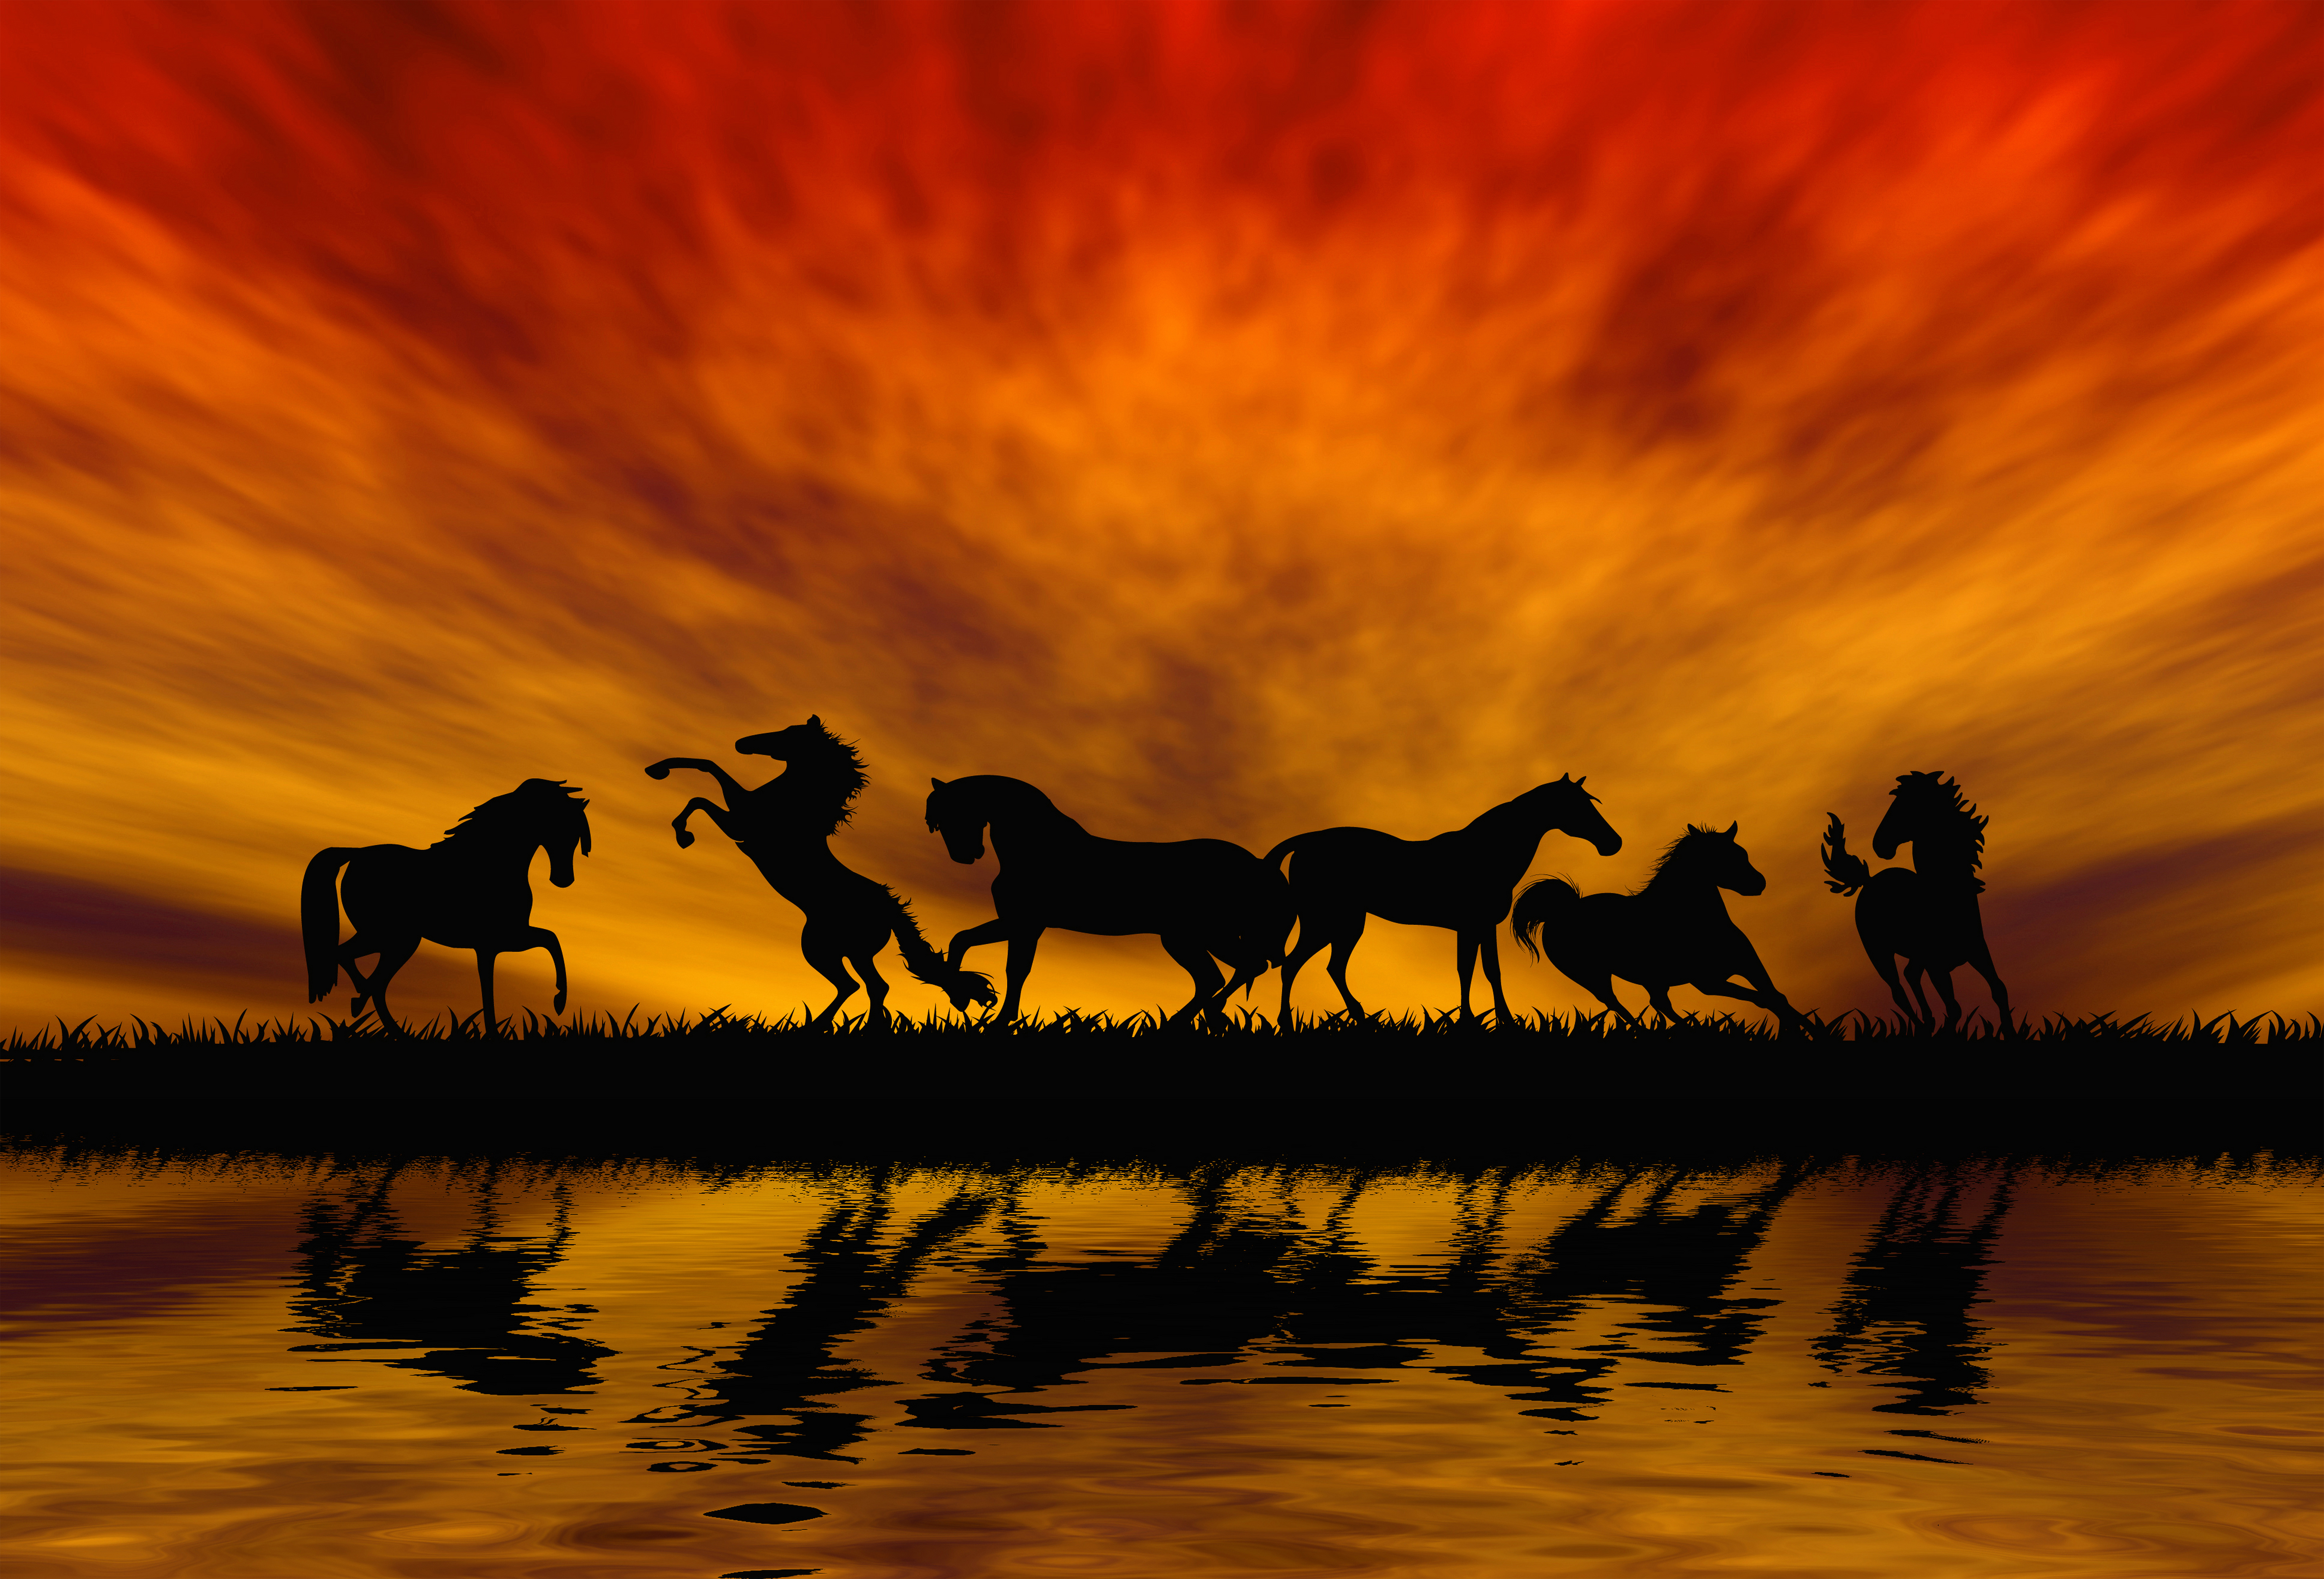 Horses Background Gallery Yopriceville   High Quality Images